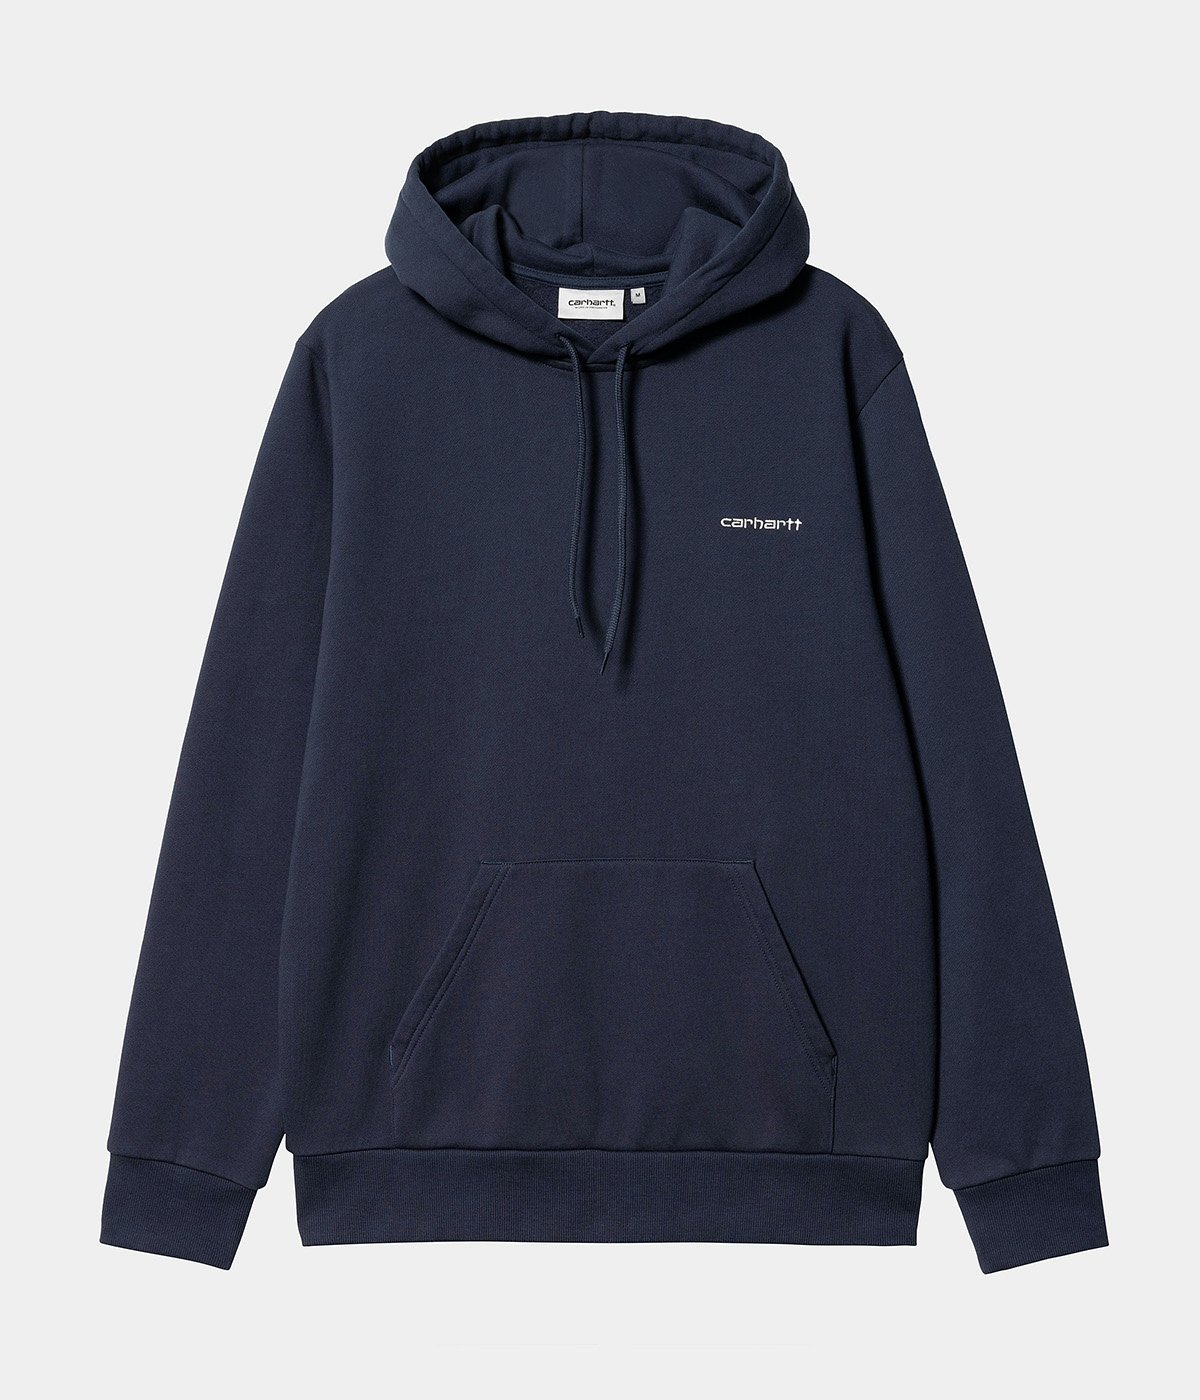 Carhartt Hooded Script Embroidery Sweater Blue / White 1